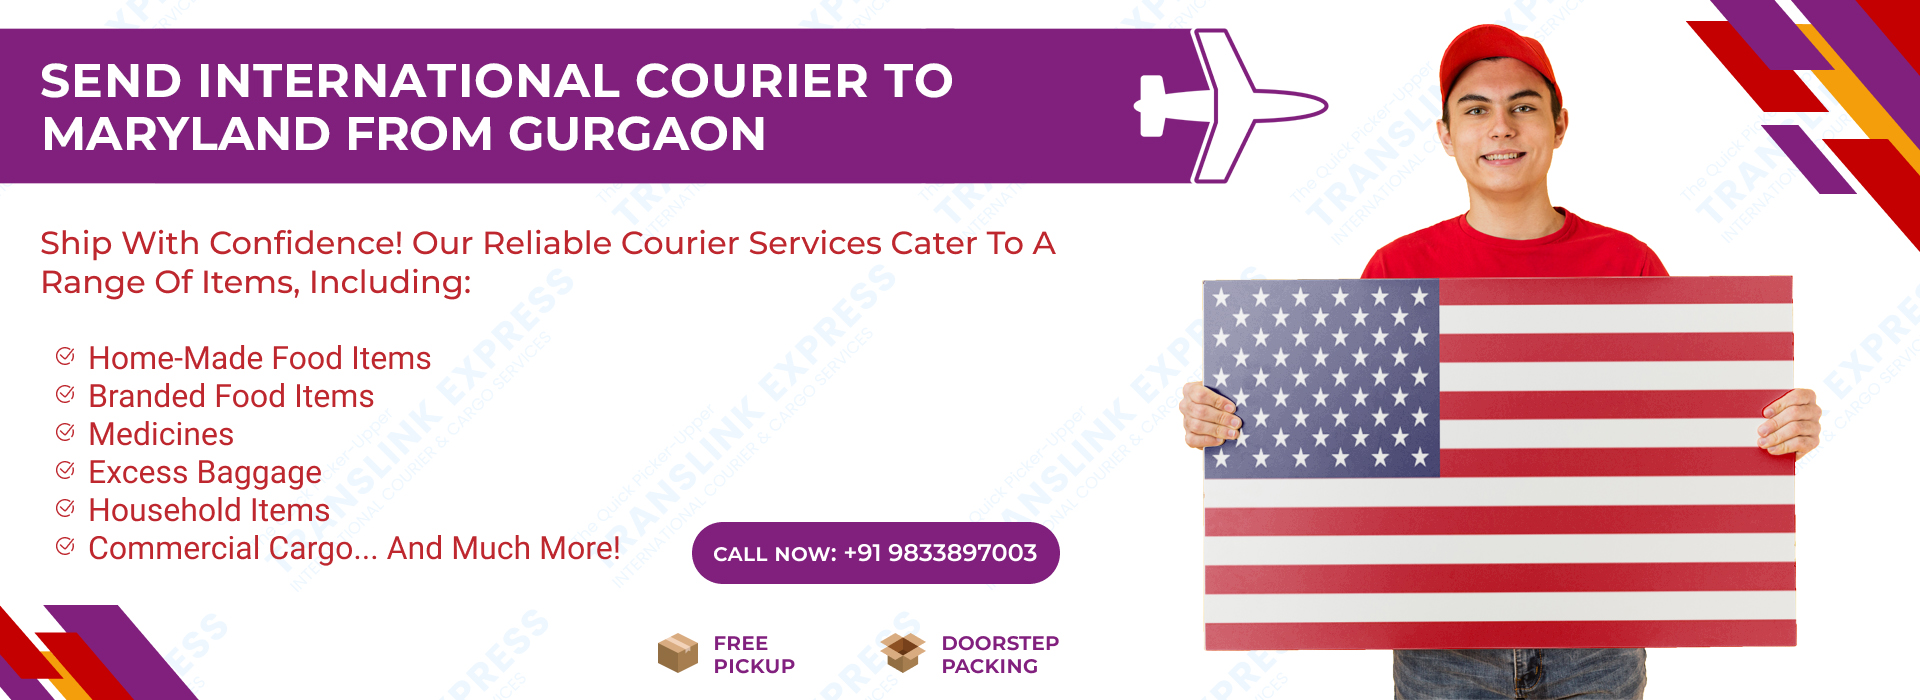 Courier to Maryland From Gurgaon